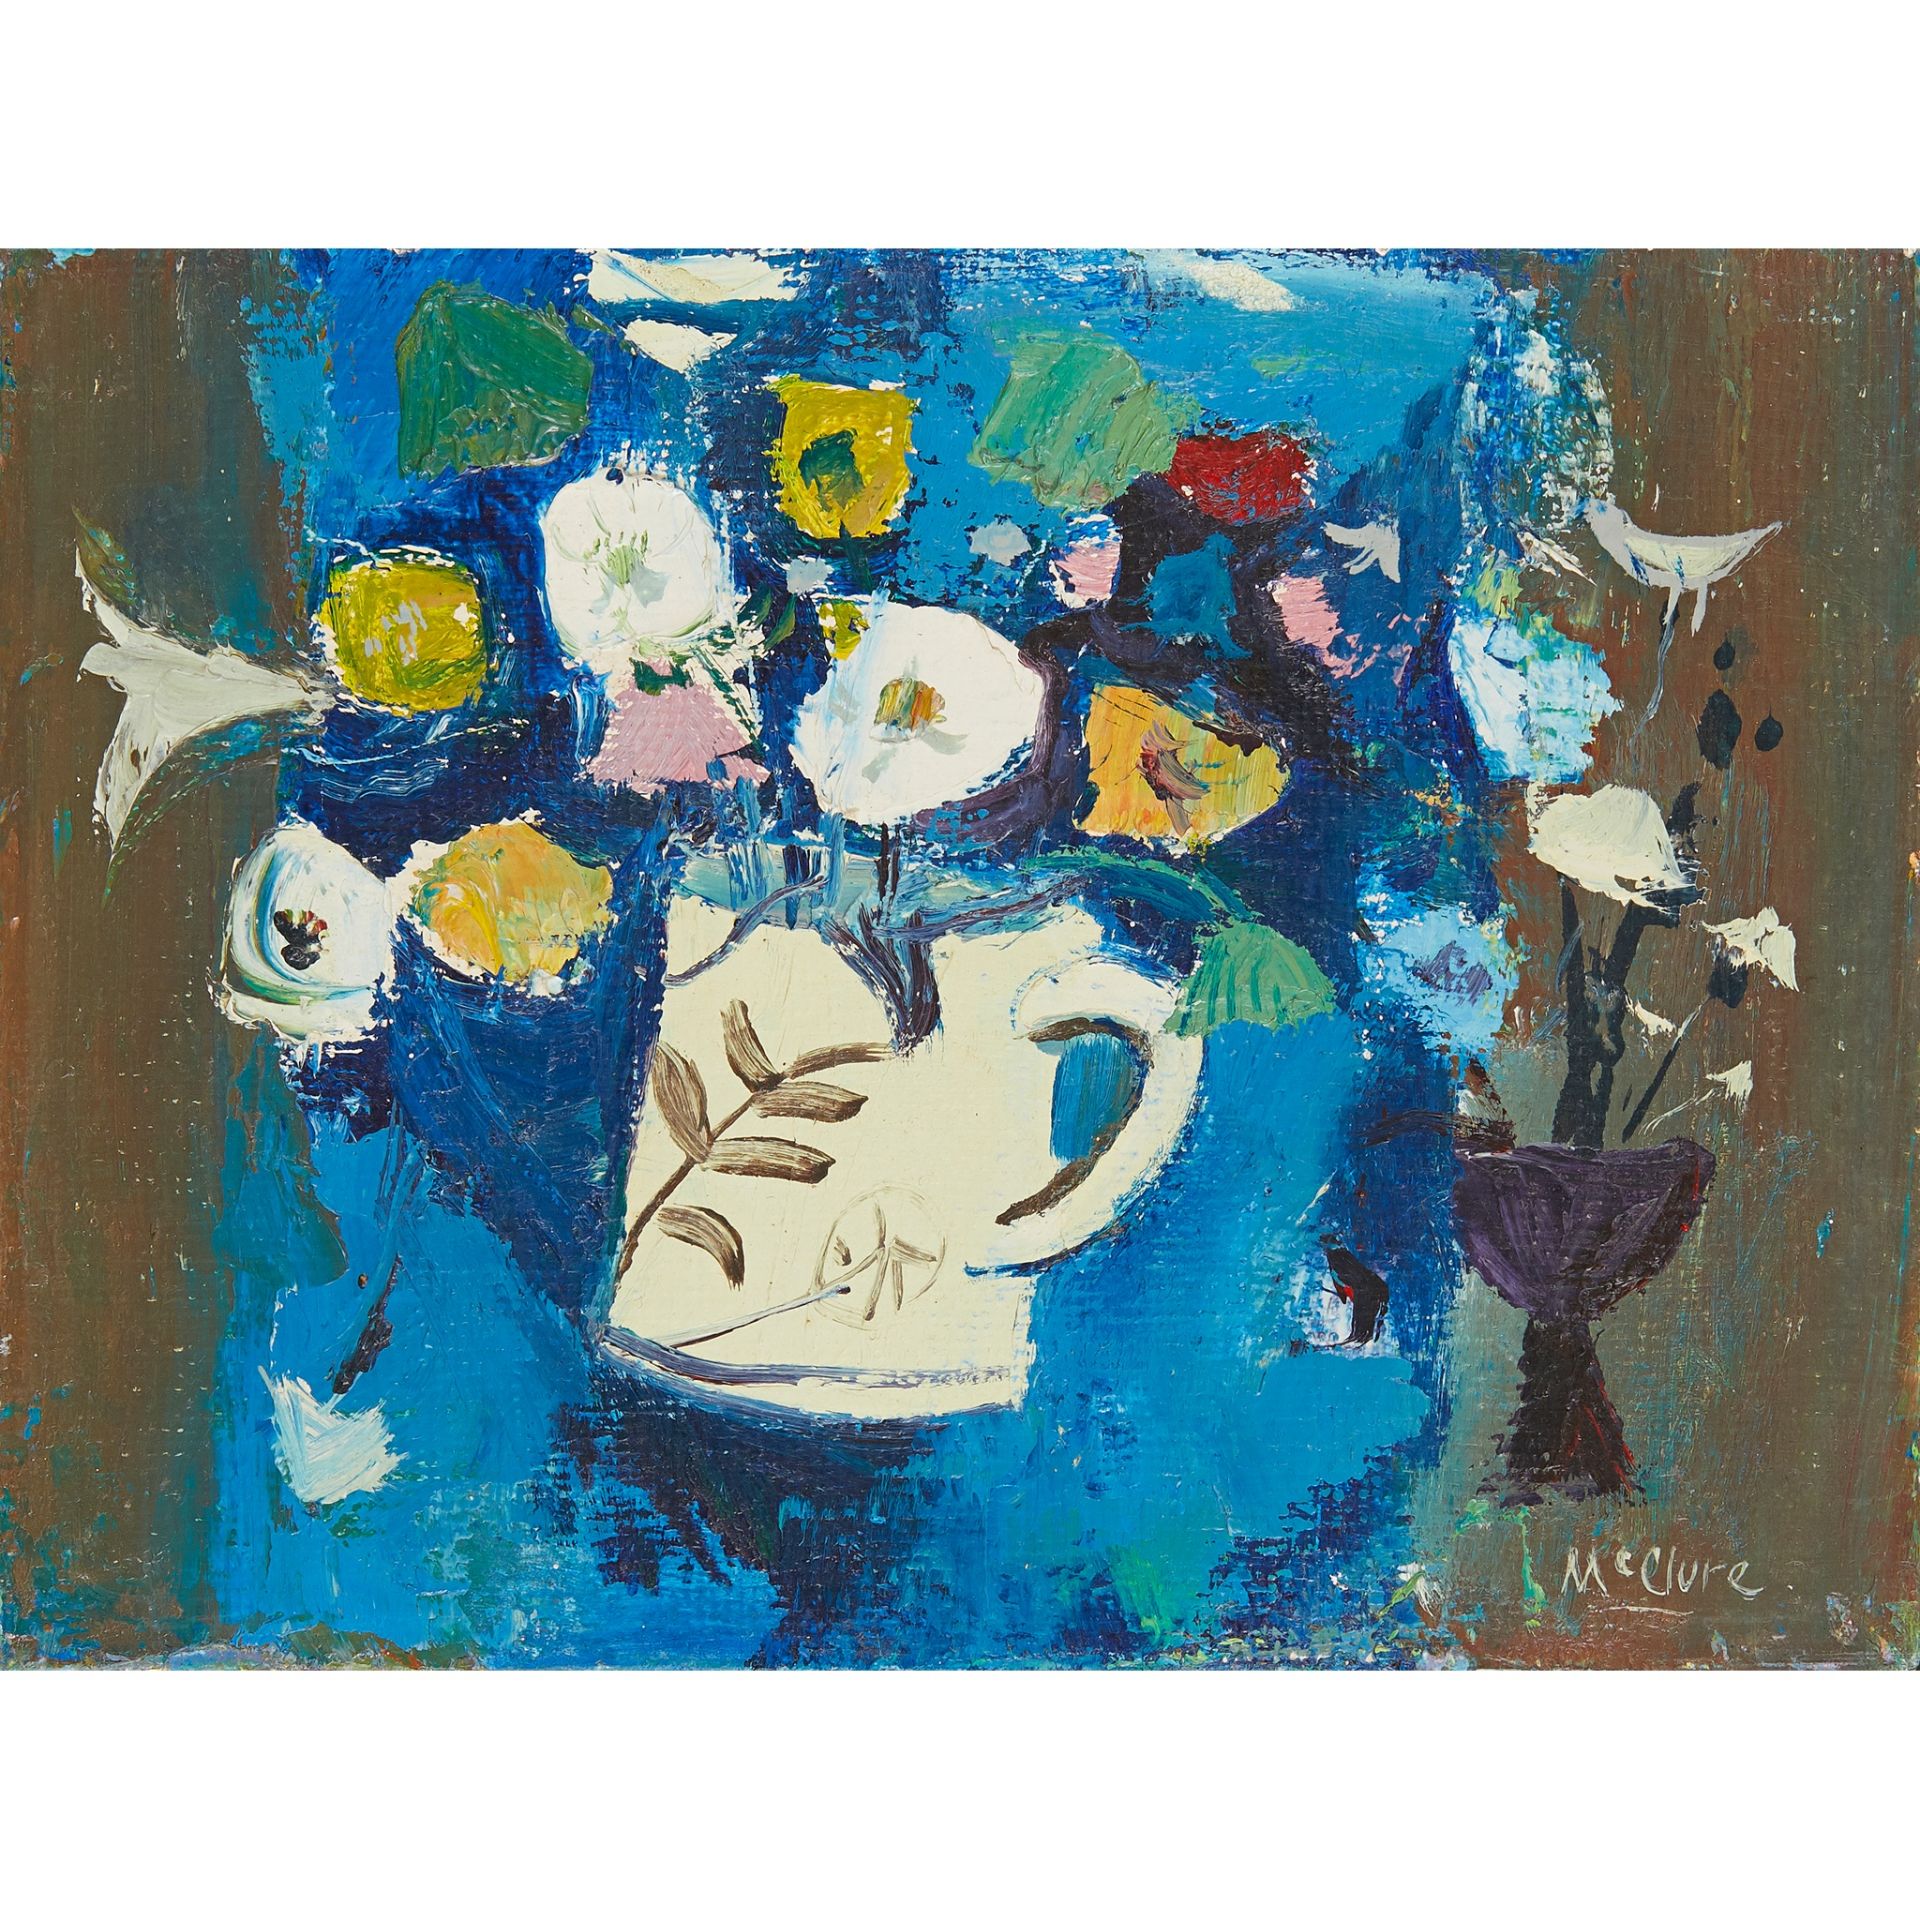 § DAVID MCCLURE R.S.A., R.S.W. (SCOTTISH 1926-1998) FLOWERS AND BIRD